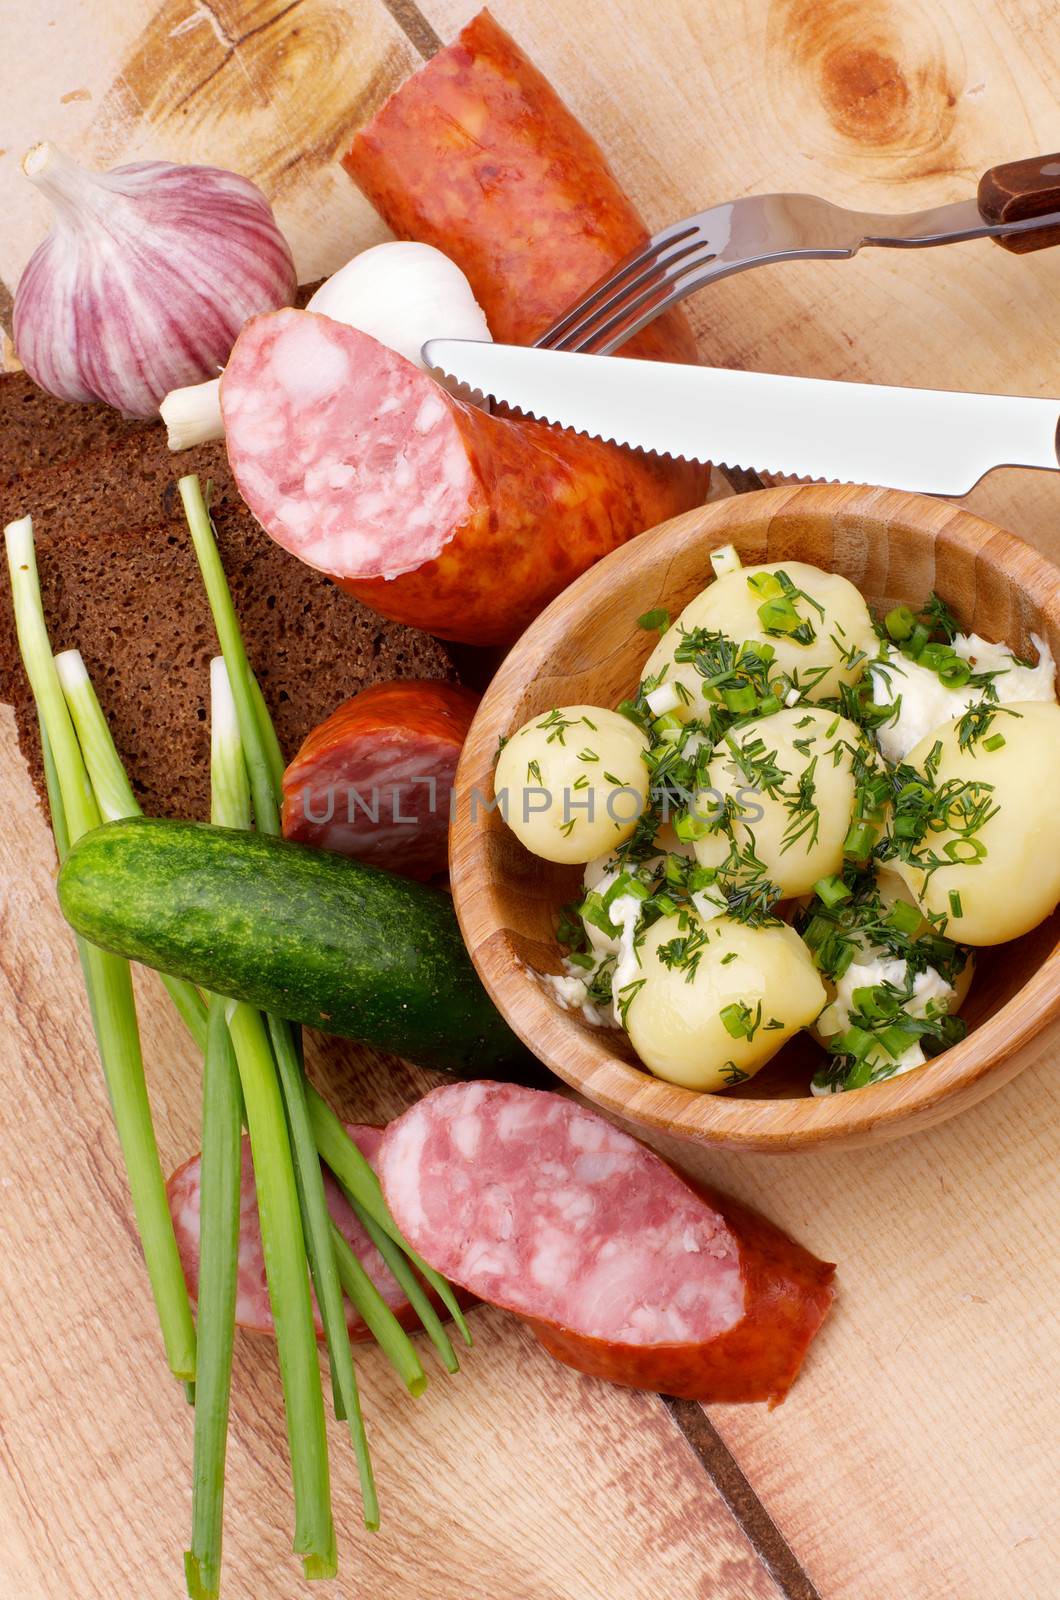 Arrangement of Boiled Potato, Spring Onion, Cucumber, Garlic, Homemade Smoked Sausage and Whole Grain Bread with Fork and Knife on Wooden background. Top View